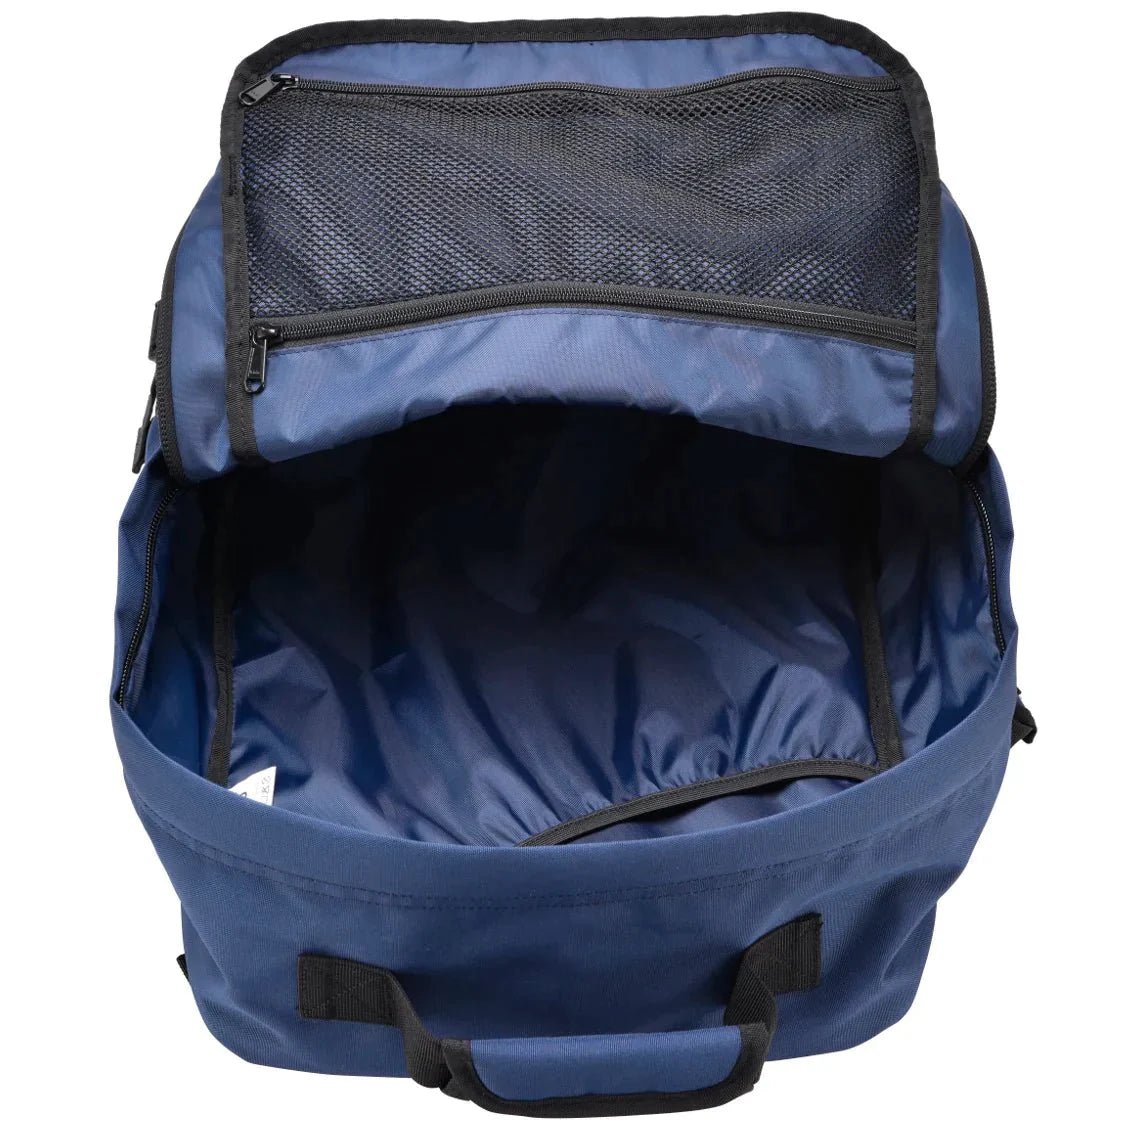 CabinZero Cabin Backpacks Classic 36L Backpack 45 cm - Hoi An